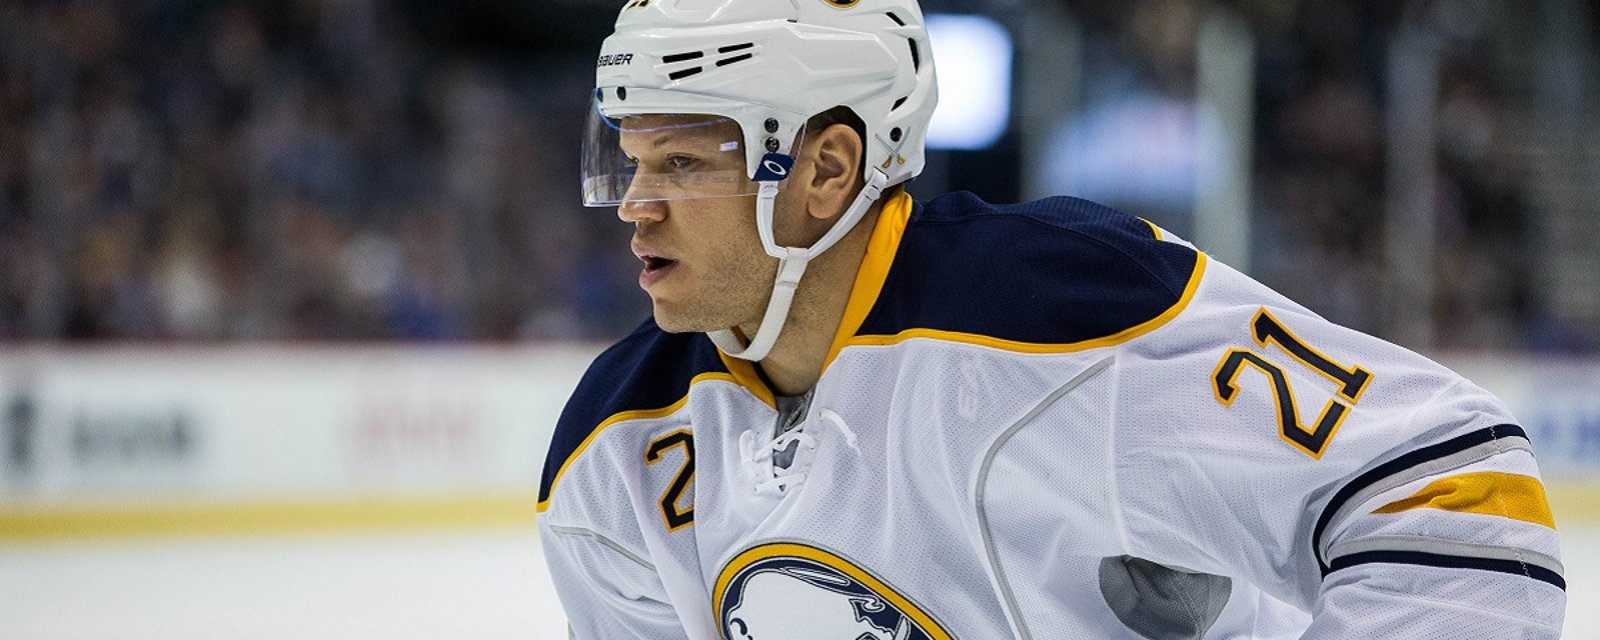 Buffalo Sabres release an official statement following reports that Okposo is in “intensive care.”